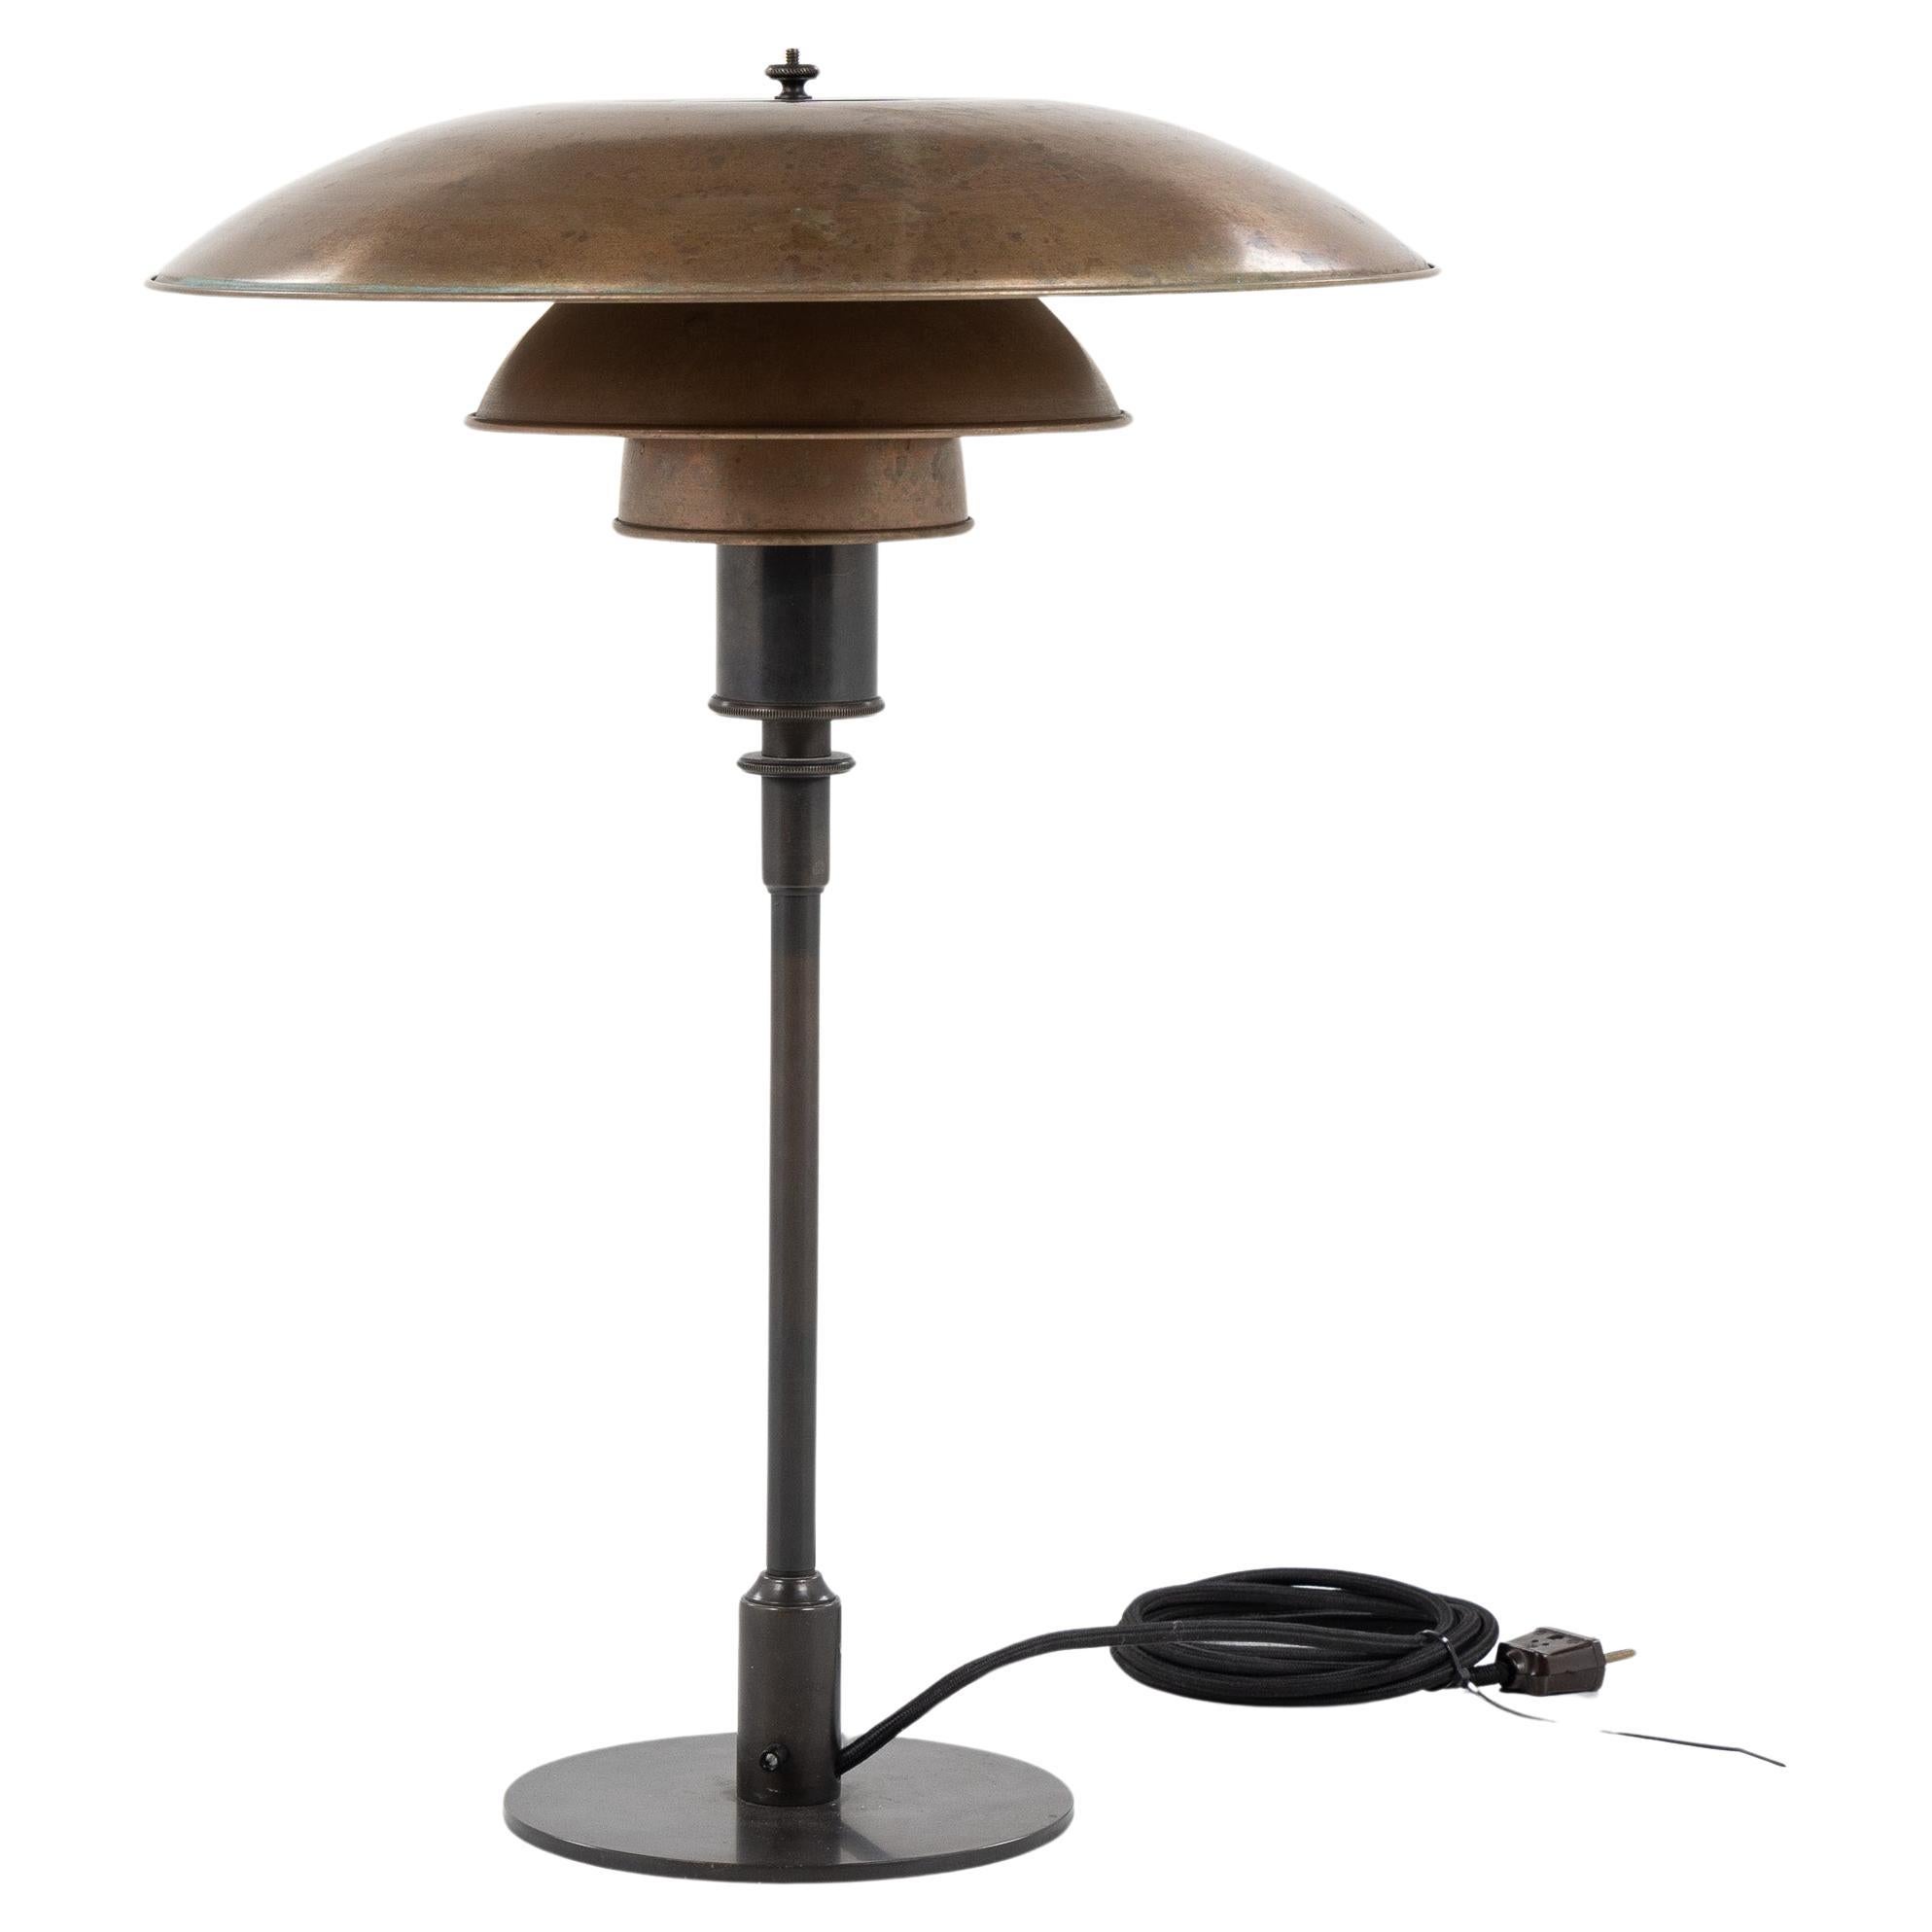 PH 4/3 - Table lamp with patined copper shades